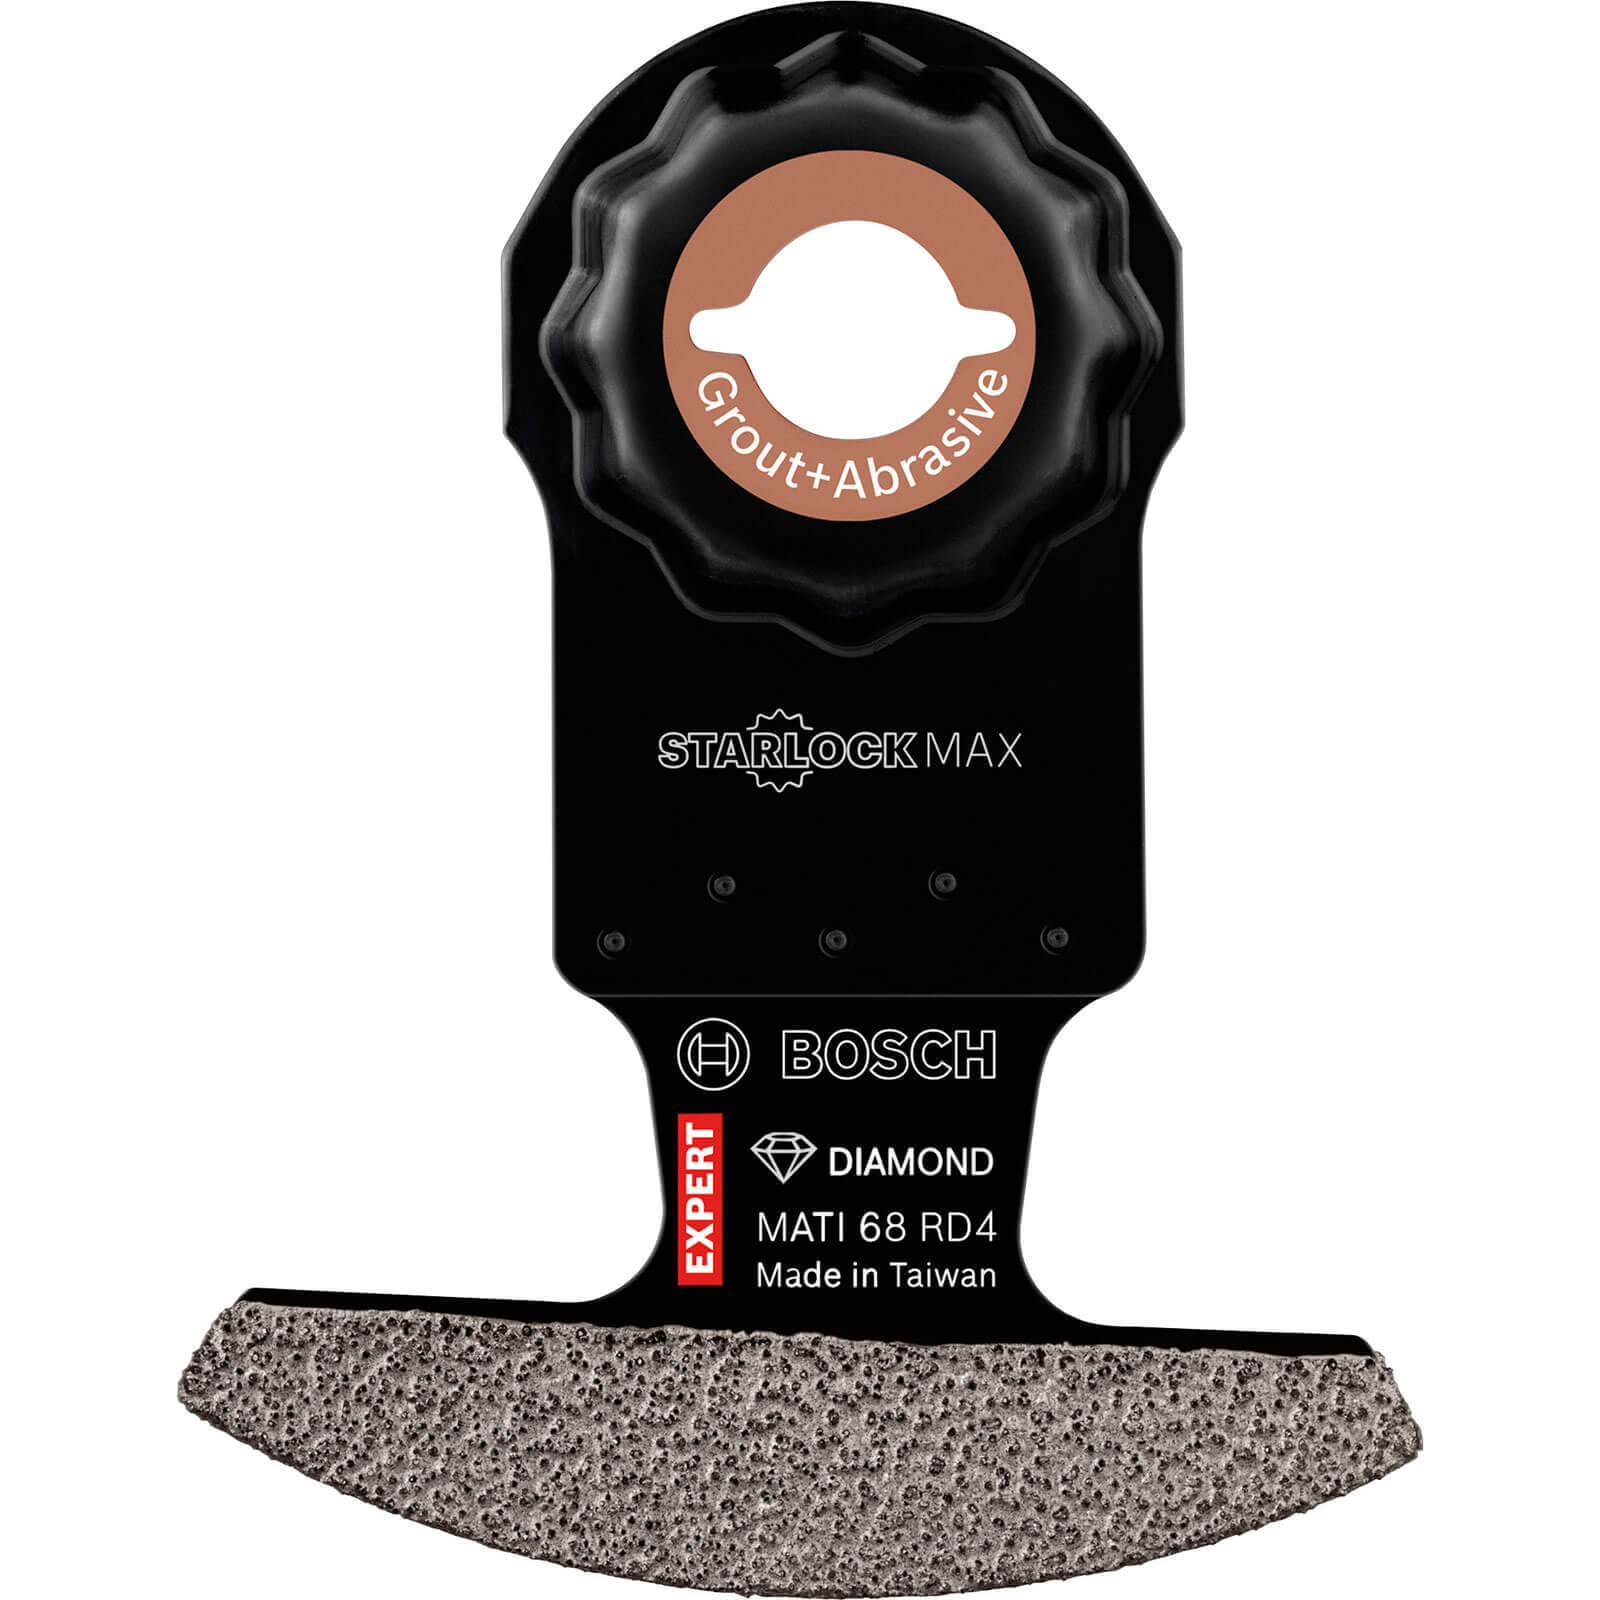 Image of Bosch Expert MATI 68 RD4 Abrasive and Grout Starlock Max Oscillating Multi Tool Segment Saw Blade 68mm Pack of 10